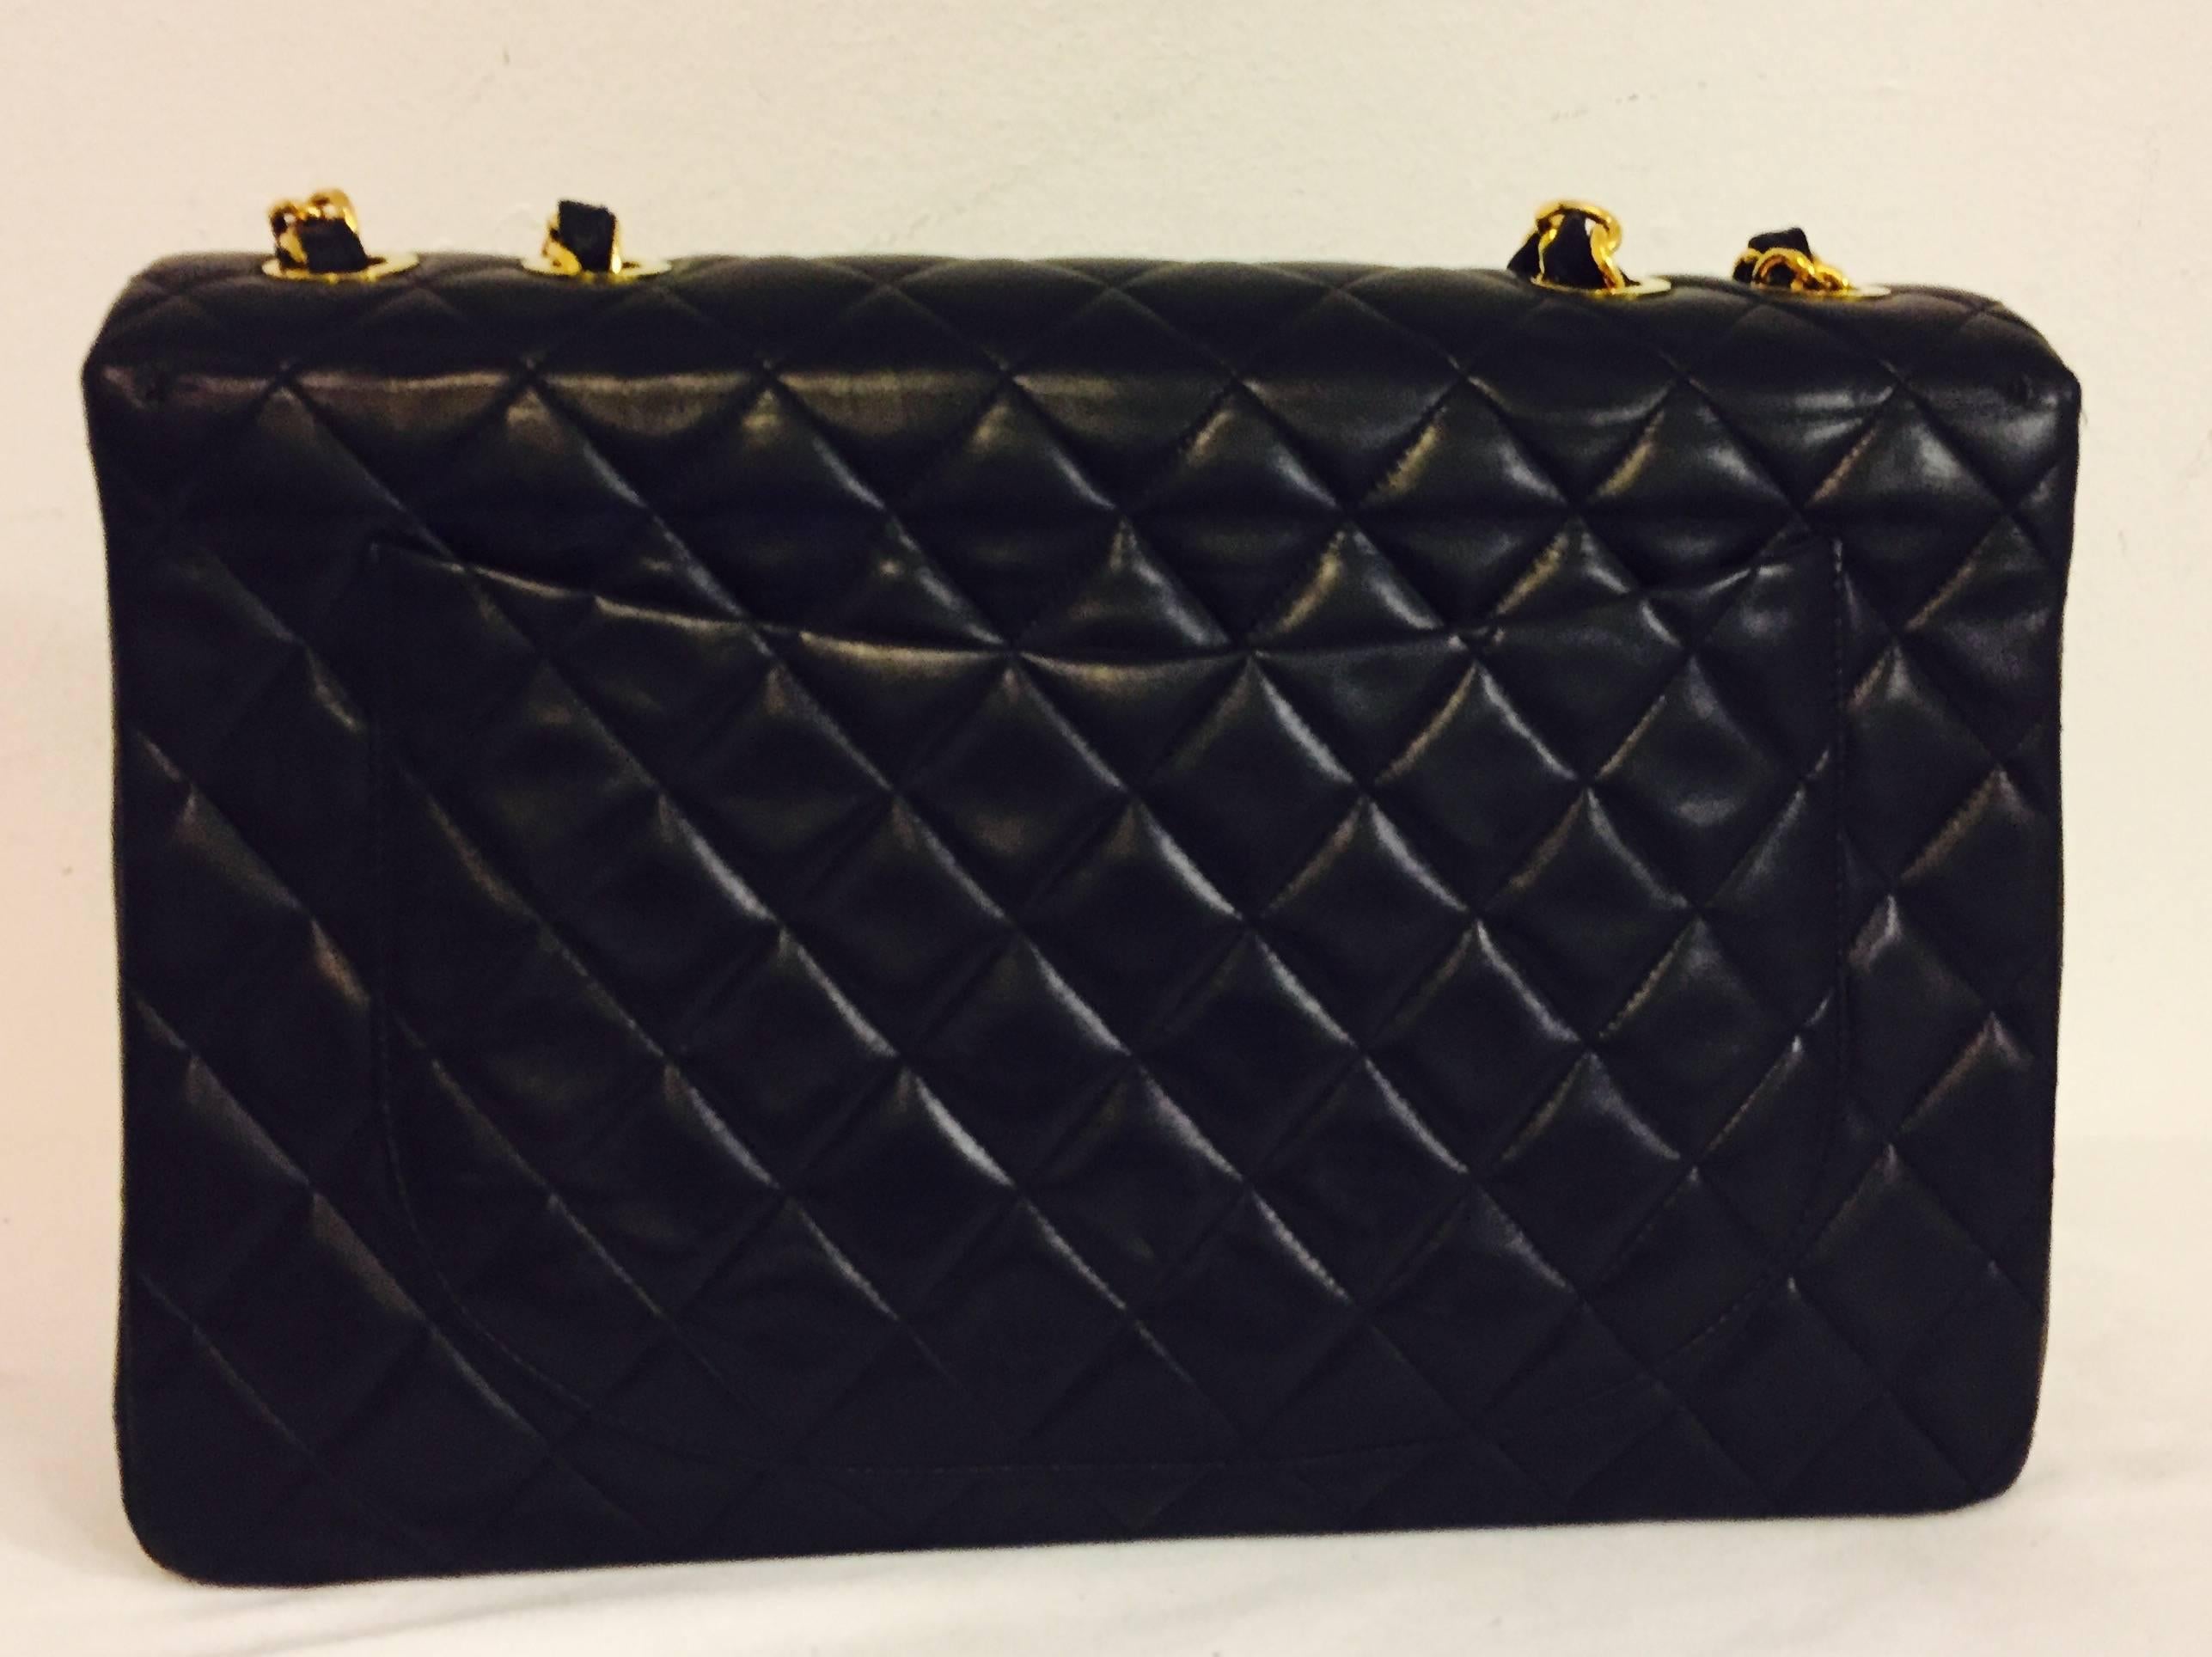 Classic Chanel Single Flap Handbag in Black Quilted Lambskin 1